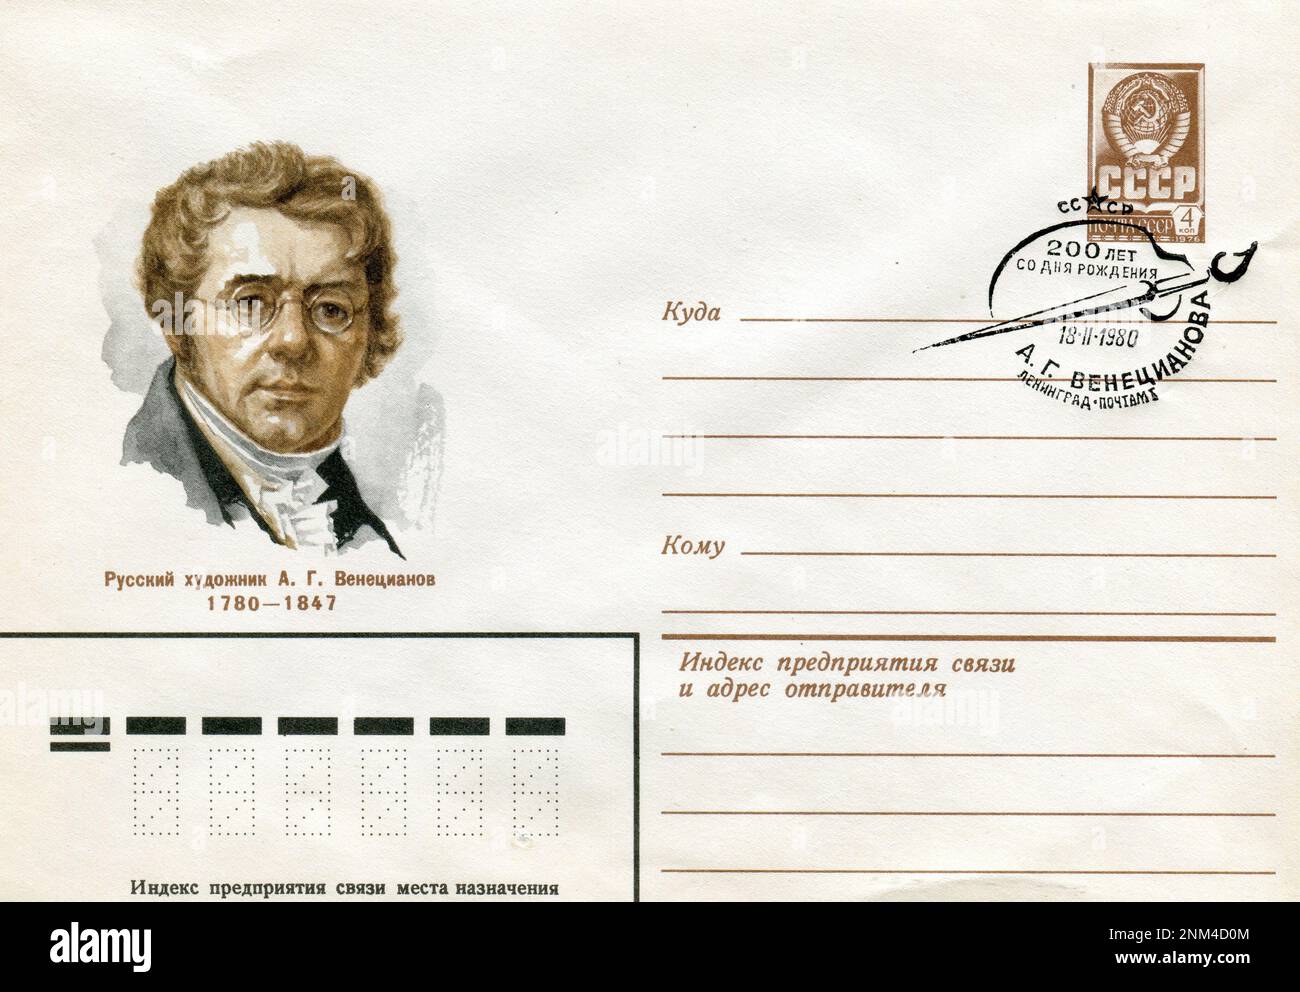 USSR - circa 1980: an USSR Post First Day Cover mailing envelope with stamps. Alexey Gavrilovich Venetsianov (Russian: Алексей Гаврилович Венецианов; 18 February 1780–4 January 1847) was a Russian painter, renowned for his paintings devoted to peasant life and ordinary people. Stock Photo